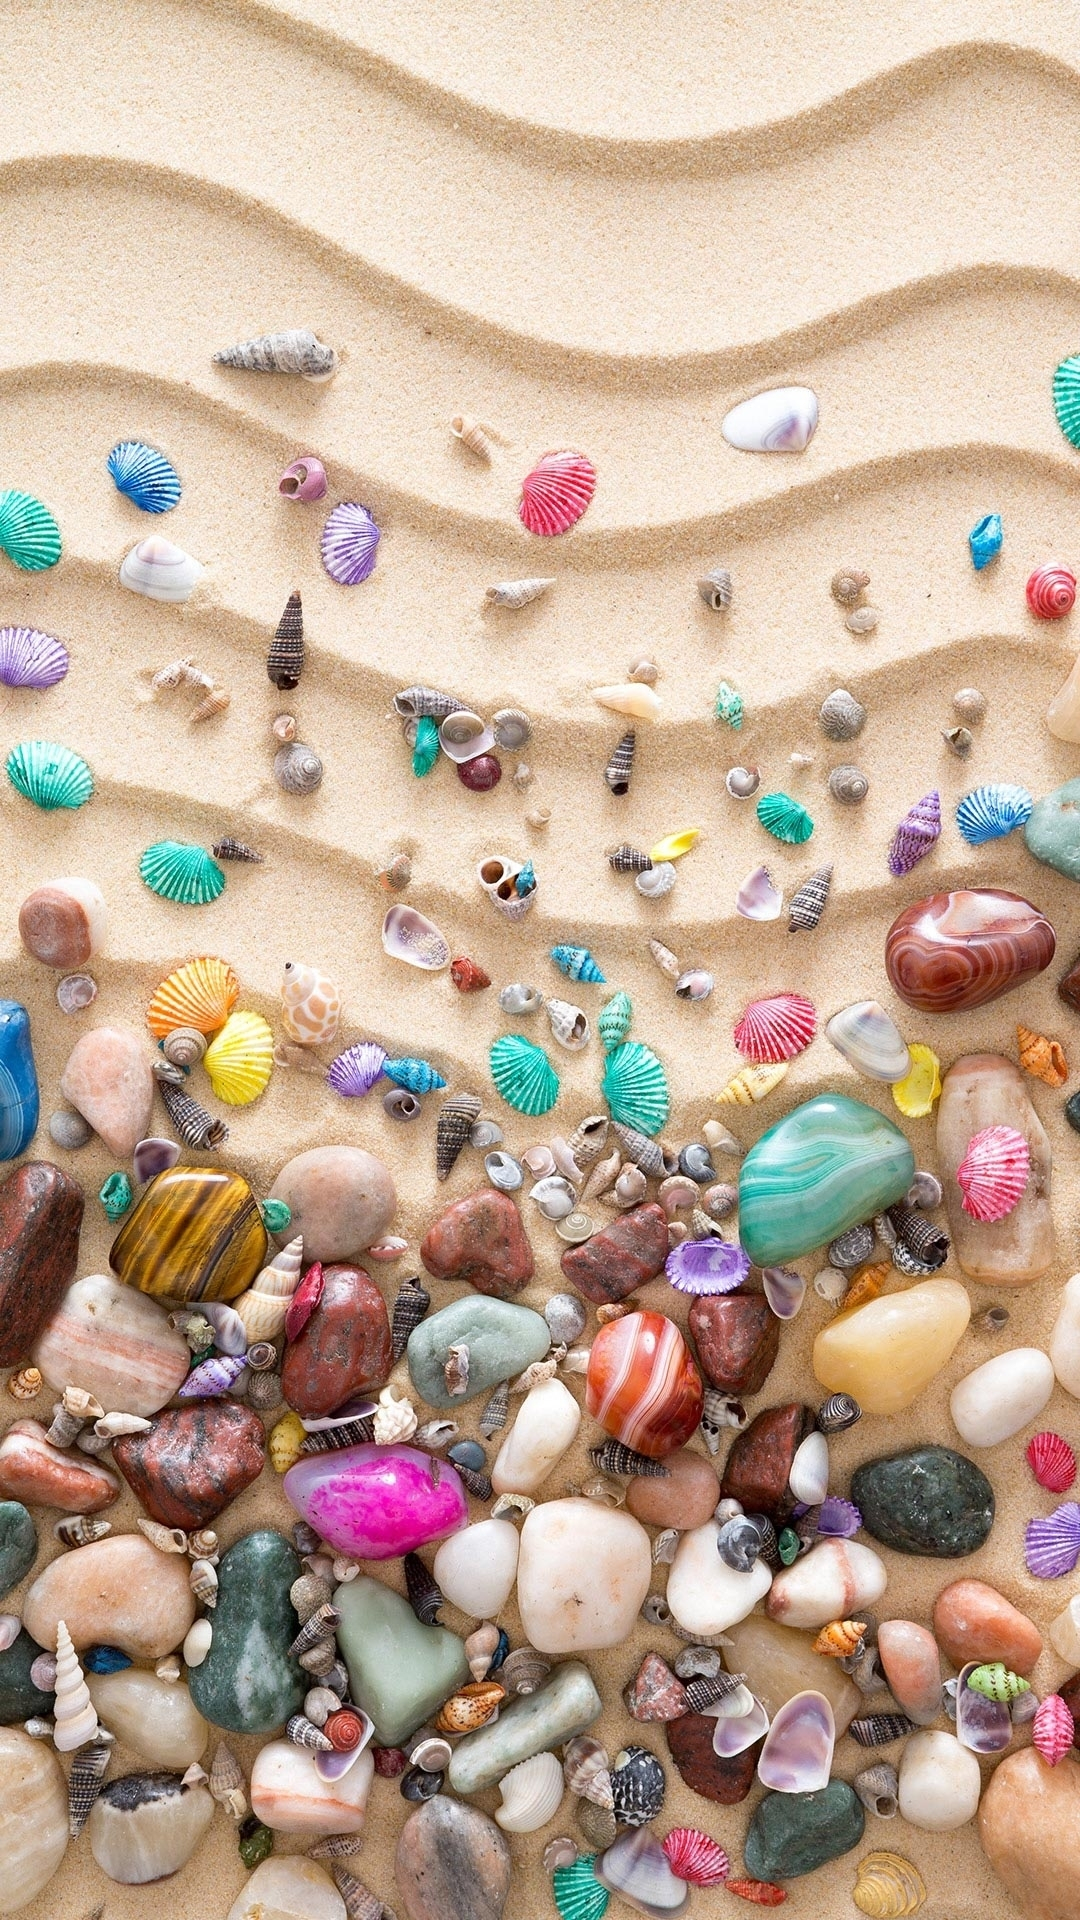 1080x1920 Colorful Seashell Sand Download Free Wallpapers for iPhone 6, 7, 8